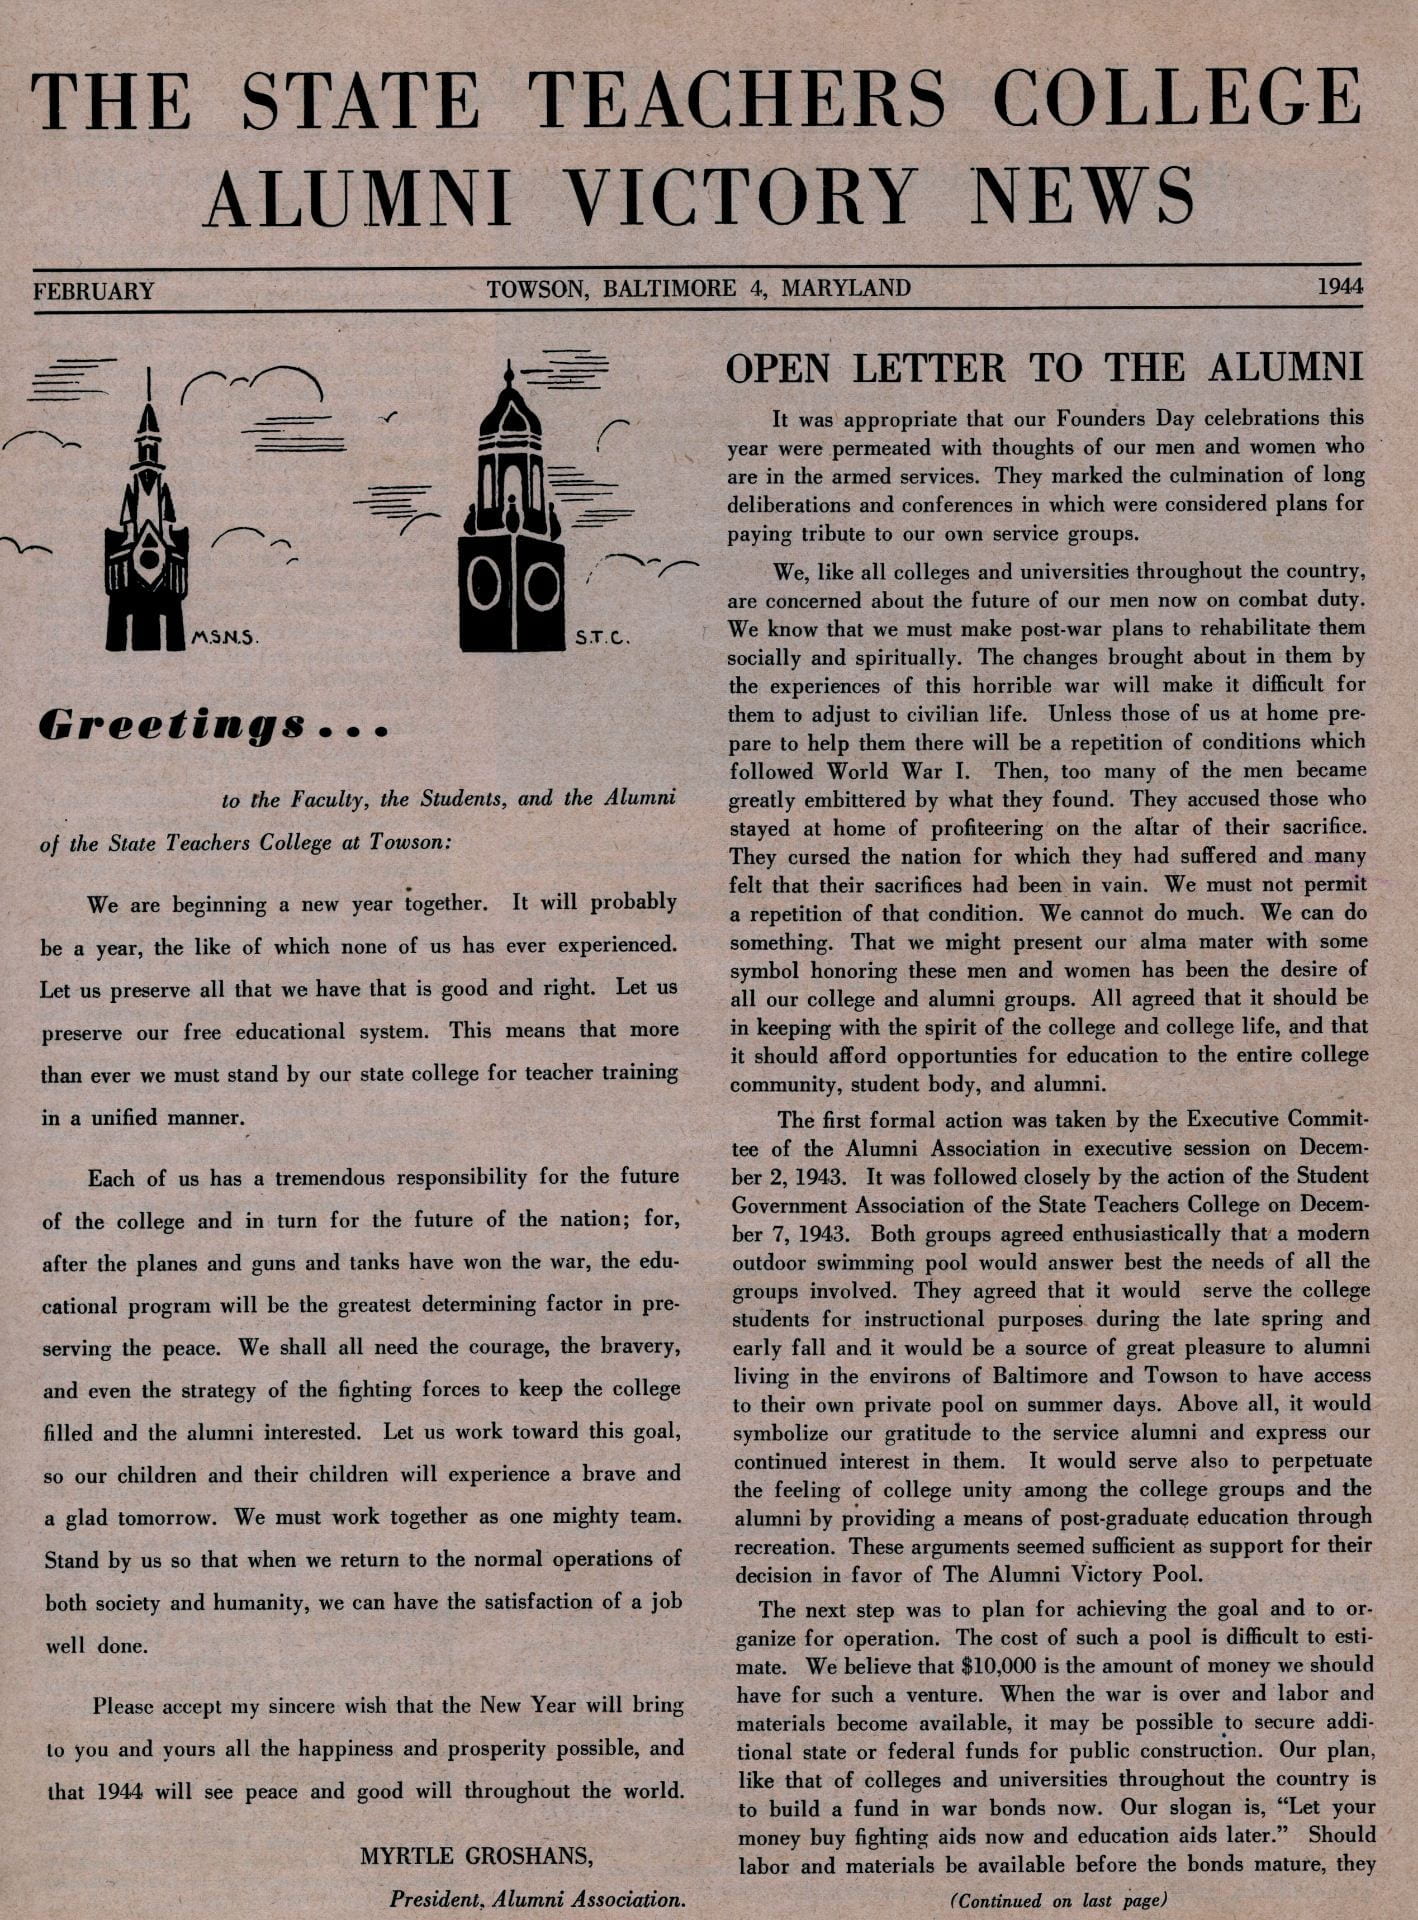 THE STATE TEACHERS COLLEGE ALUMNI VICTORY NEWS 1944 FEBRUARY TOWSON, BALTIMORE 4, MARYLAND OPEN LETTER TO THE ALUMNI It was appropriate that our Founders Day celebrations this year were permeated with thoughts of our men and women who are in the armed services. They marked the culmination of long deliberations and conferences in which were considered plans for paying tribute to our own service groups. We, like all colleges and universities throughout the country, are concerned about the future of our men now on combat duty. We know that we must make post-war plans to rehabilitate them socially and spiritually. The changes brought about in them by the experiences of this horrible war will make it difficult for them to adjust to civilian life. Unless those of us at home prepare to help them there will be a repetition of conditions which followed World War I. Then, too many of the men became greatly embittered by what they found. They accused those who stayed at home of profiteering on the altar of their sacrifice. They cursed the nation for which they had suffered and-many felt that their sacrifices had been in vain. We must not permit a repetition of that condition. We cannot do much. We can do something. That we might present our alma mater with some symbol honoring these men and women has been the desire of all our college and alumni groups. All agreed that it should be in keeping with the spirit of the college and college life, and that it should afford opportunities for education to the entire college community, student body, and alumni. The first formal action was taken by the Executive Committee of the Alumni Association in executive session on December 2, 1943. It was followed closely by the action of the Student Government Association of the State Teachers College on December 7, 1943. Both groups agreed enthusiastically that a modern outdoor swimming pool would answer best the needs of all the groups involved. They agreed that it would serve the college students for instructional purposes. during the late spring and early fall and it would be a source of great pleasure to alumni living in the environs of Baltimore and Towson to have access to their own private pool on summer days. Above all, it would symbolize our gratitude to the service alumni and express our continued interest in them. It would serve also to perpetuate the feeling of college unity among the college groups and the alumni by providing a means of post-graduate education through recreation. These arguments seemed sufficient as support for their decision in favor of The Alumni Victory Pool. The next step was to plan for achieving the goal and to organize for operation. The cost of such a pool is difficult to estimate. We believe that $10,000 is the amount of money we should have for such a venture. When the war is over and labor and materials become available, it may be possible to secure additional state or federal funds for public construction. Our plan, like that of colleges and universities throughout the country is to build a fund in war bonds now. Our slogan is, ' 'Let your money buy fighting aids now and education aids later." Should labor and materials be available before the bonds mature, they (Continued on last page) Greetings to the Faculty, the Students, and the Alumni of the State Teachers College at Towson: We are beginning a new year together. It will probably be a year, the like of which none of us has ever experienced. Let us preserve all that we have that is good and right. Let us preserve our free educational system. This means that more than ever we must stand by our state college for teacher training in a unified manner. Each of us has a tremendous responsibility for the future of the college and in turn for the future of the nation; for, after the planes and guns and tanks have won the war, the educational program will be the greatest determining factor in preserving the peace. We shall all need the courage, the bravery, and even the strategy of the fighting forces to keep the college filled and the alumni interested. Let us work toward this goal, so our children and their children will experience a brave and a glad tomorrow. We must work together as one mighty team. Stand by us so that when we return to the normal operations of both society and humanity, we can have the satisfaction of a job well done. Please accept my sincere wish that the New Year will bring to you and vours all the happiness and prosperity possible, and that 1944 will see peace and good will throughout the world. MYRTLE GROSHANS, President, Alumni Association. 